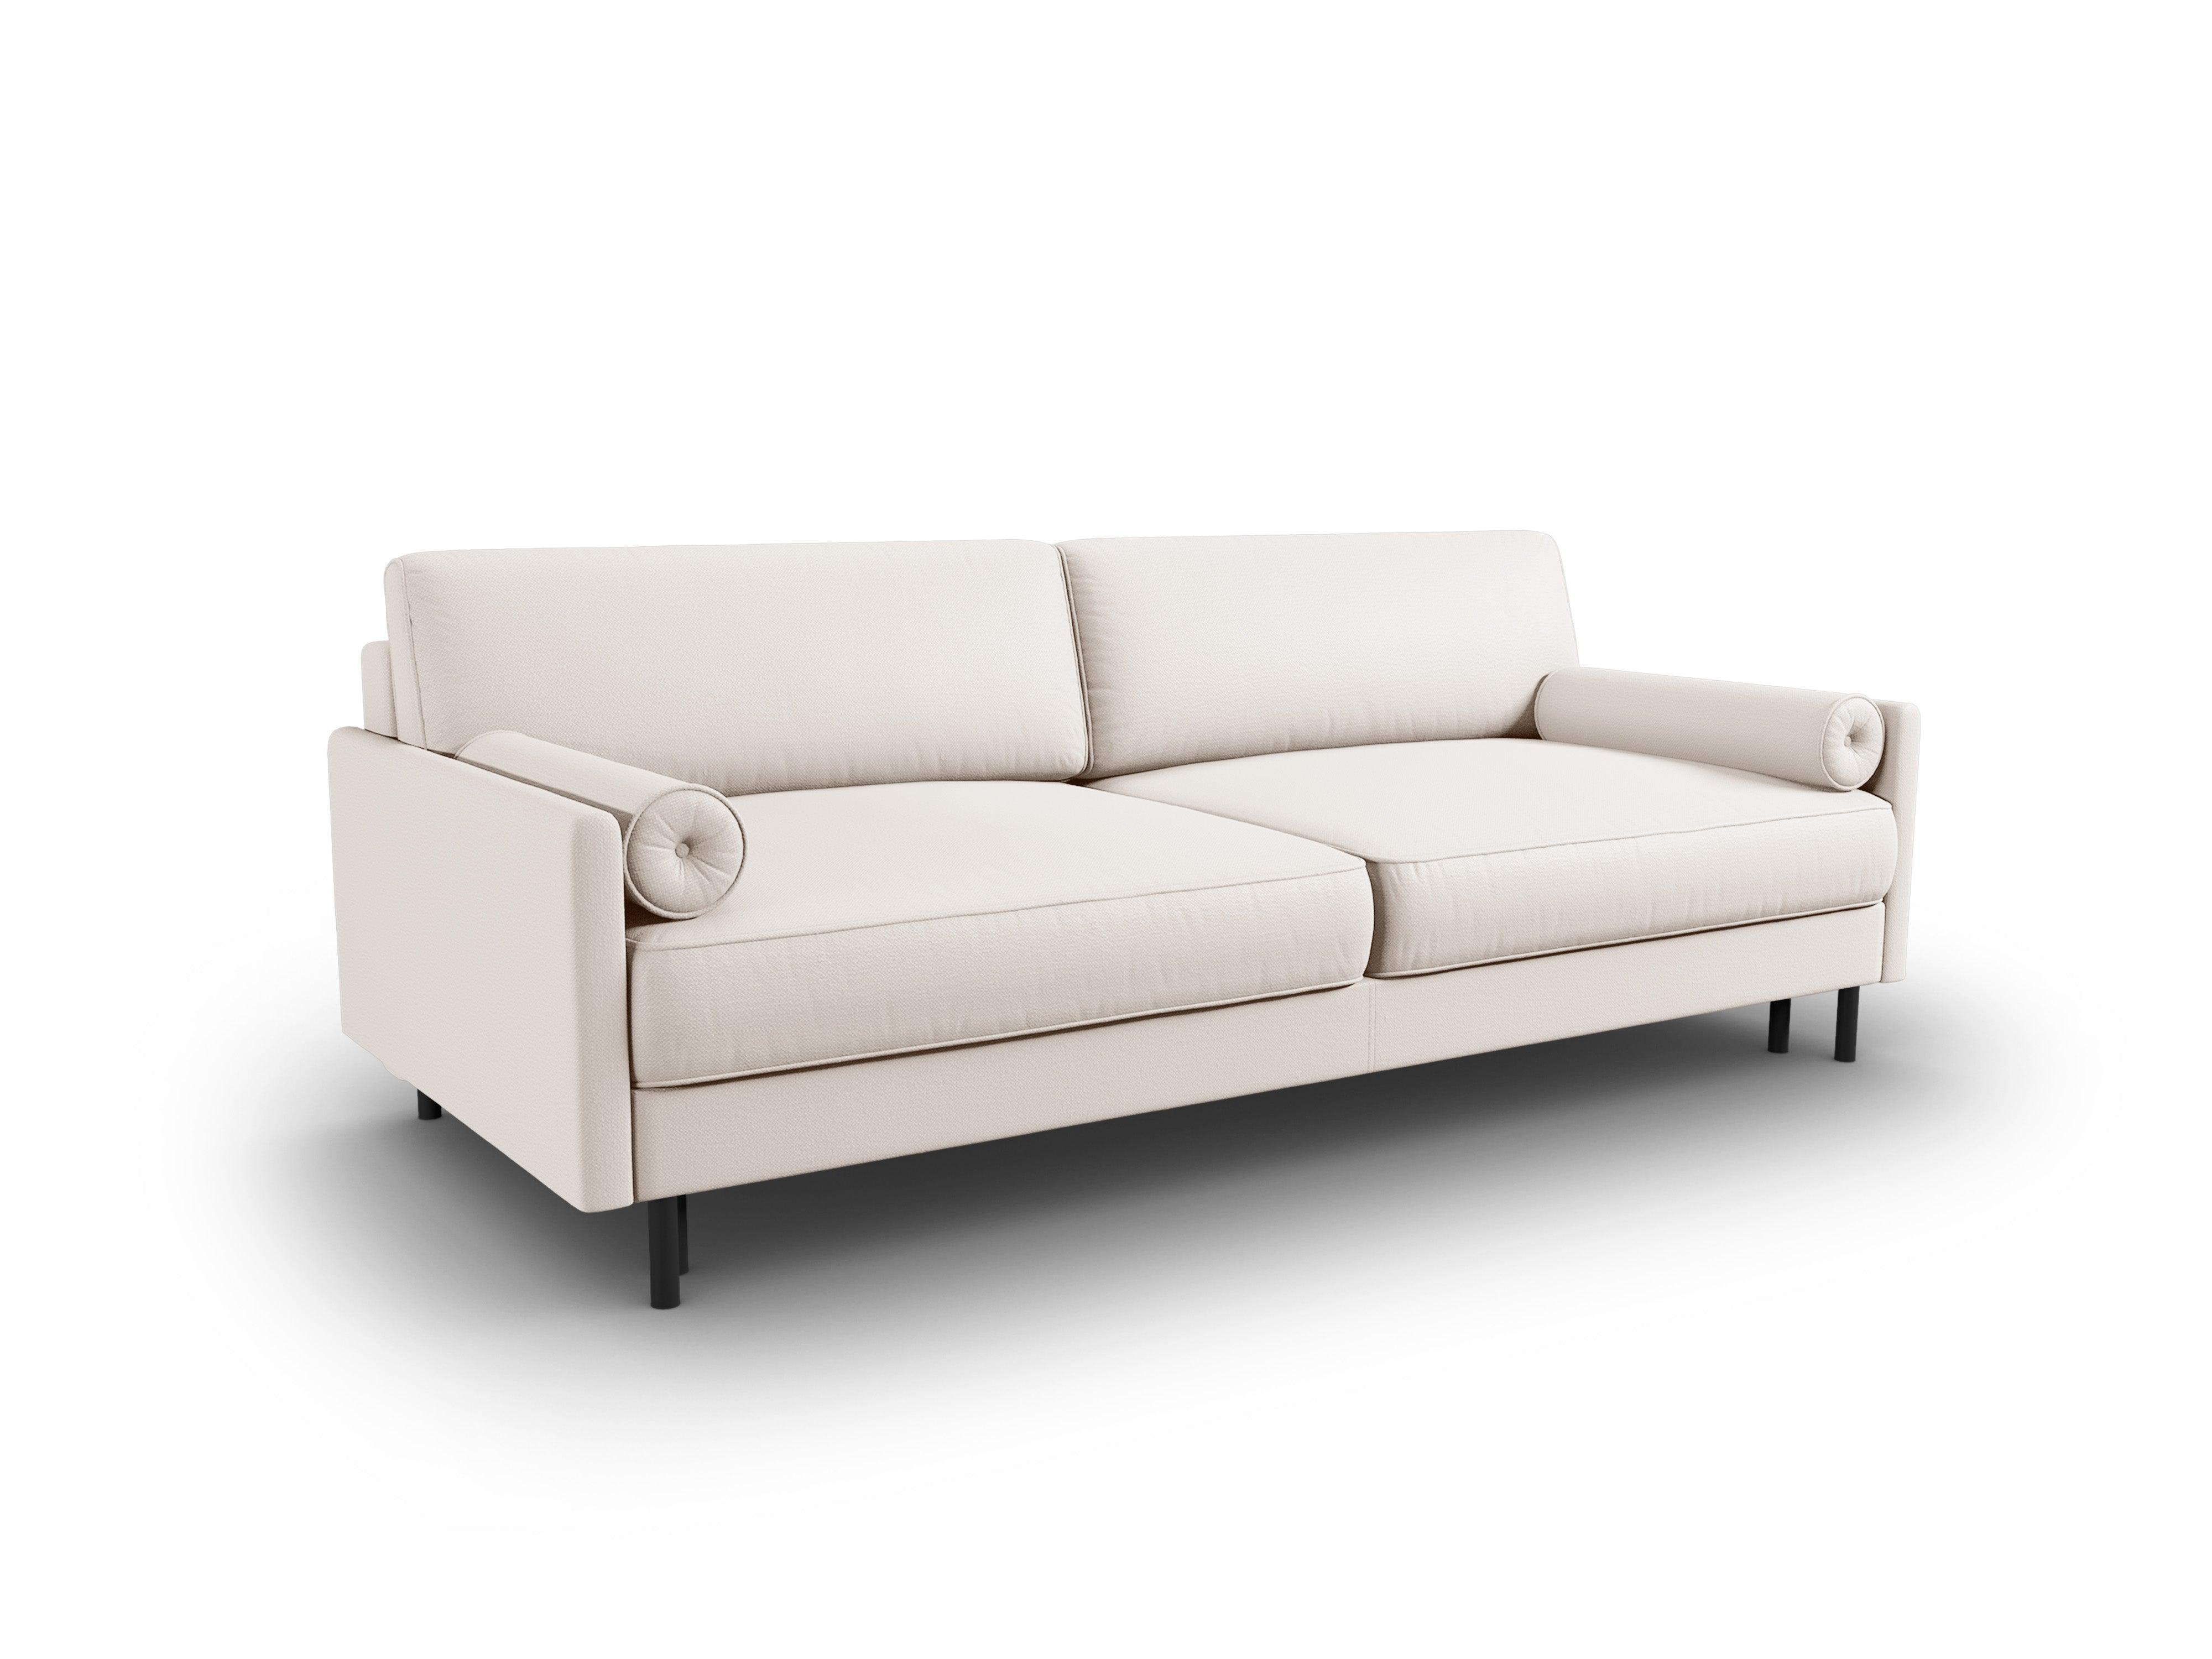 Sofa With Bed Function And Box, "Scott", 3 Seats, 212x97x87
Made in Europe, Micadoni, Eye on Design